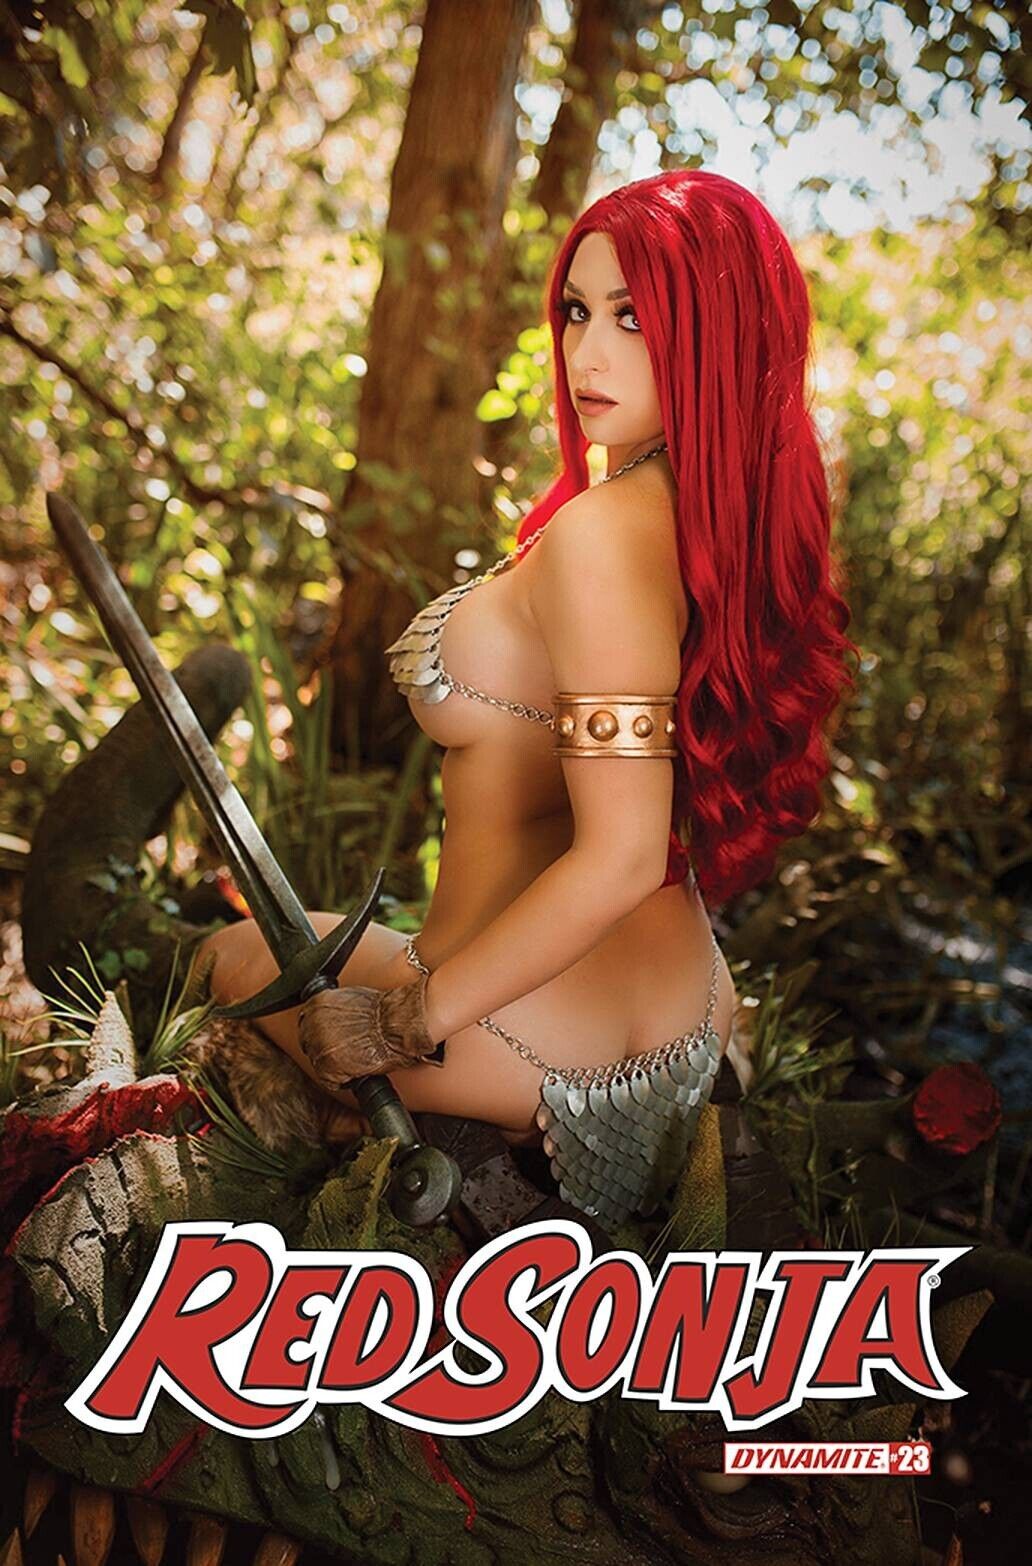 RED SONJA #24 TABITHA LYONS COSPLAY PHOTO VARIANT COVER BY DYNAMITE 2021